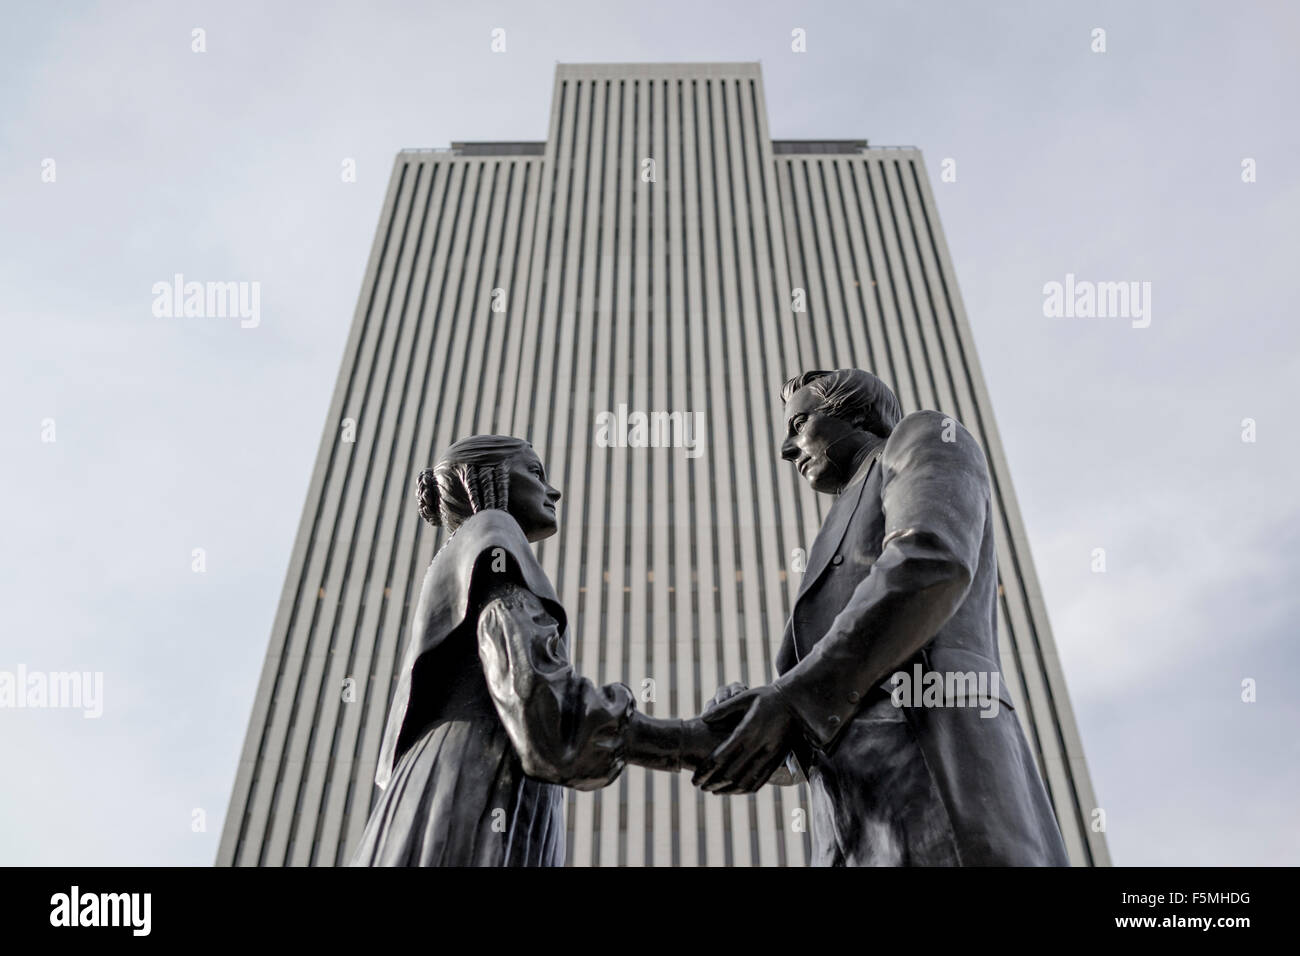 Joseph Smith and his wife Emma standing in front of the Mormons' International Head Quarters, Salt Lake City, Utah Stock Photo